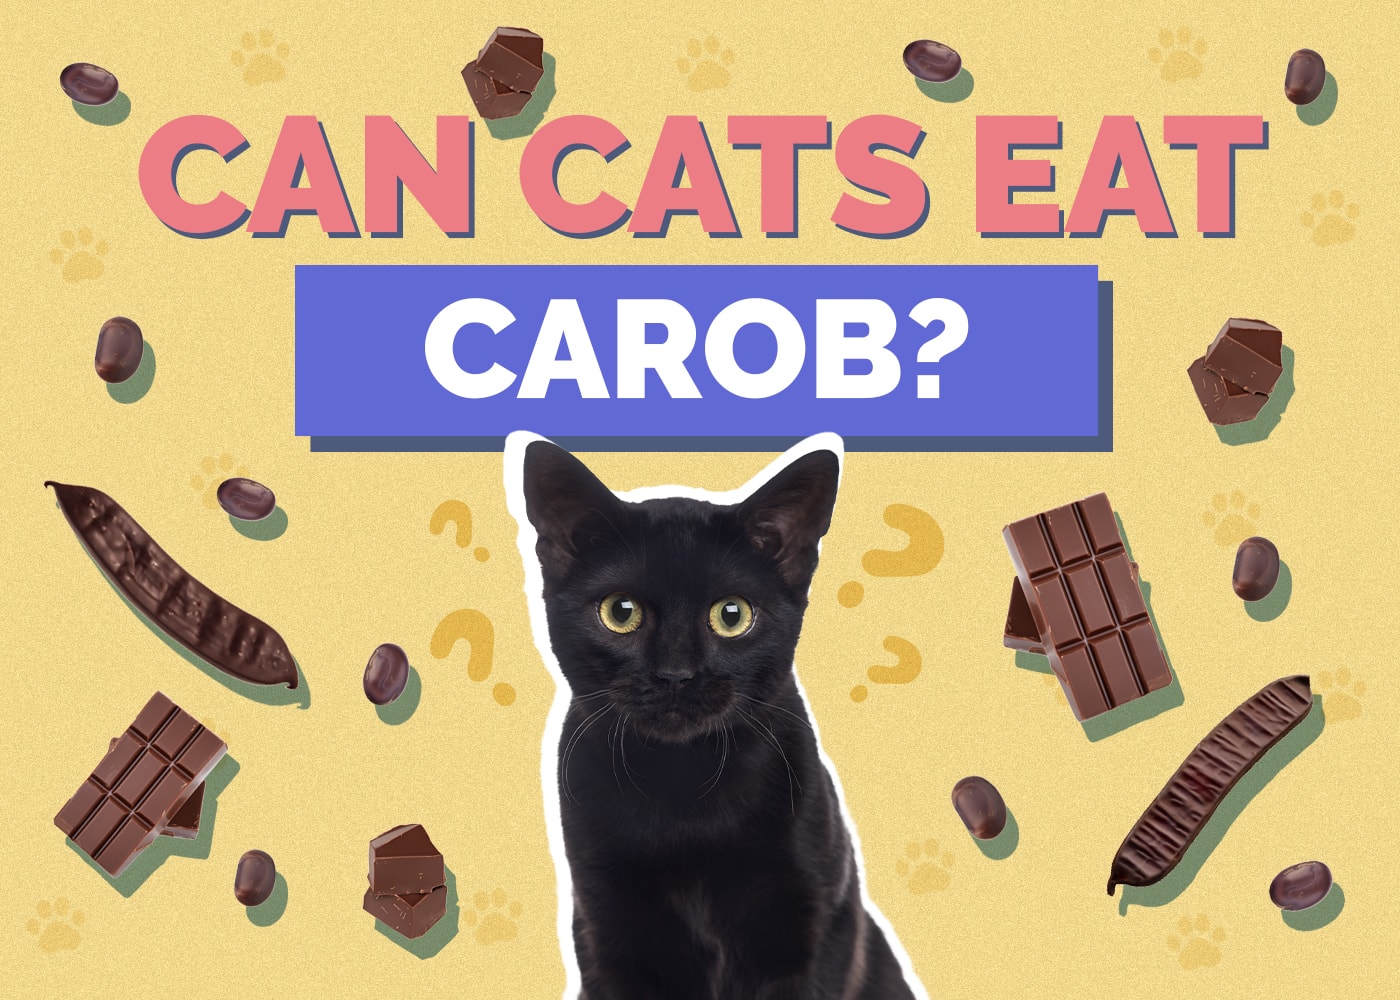 Can Cats Eat carob